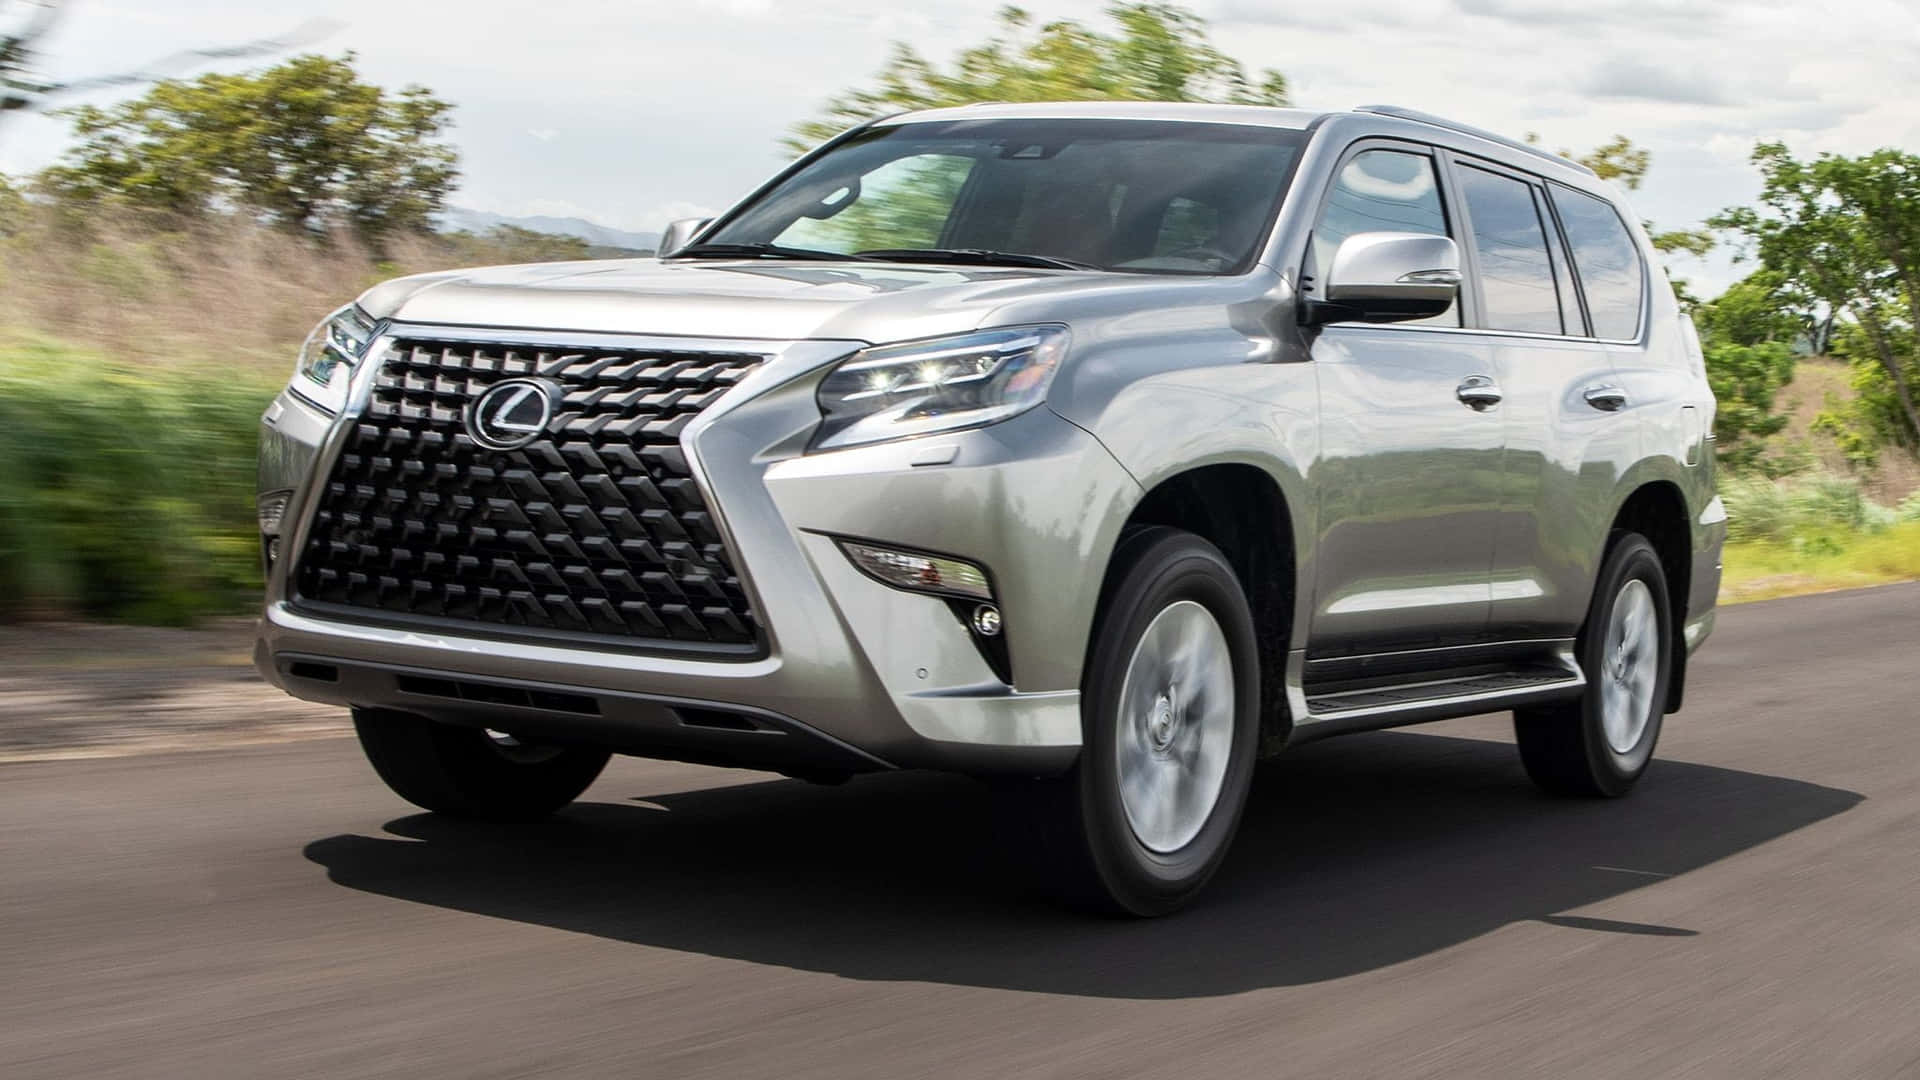 Experience Luxury and Performance with the Lexus GX 460 Wallpaper